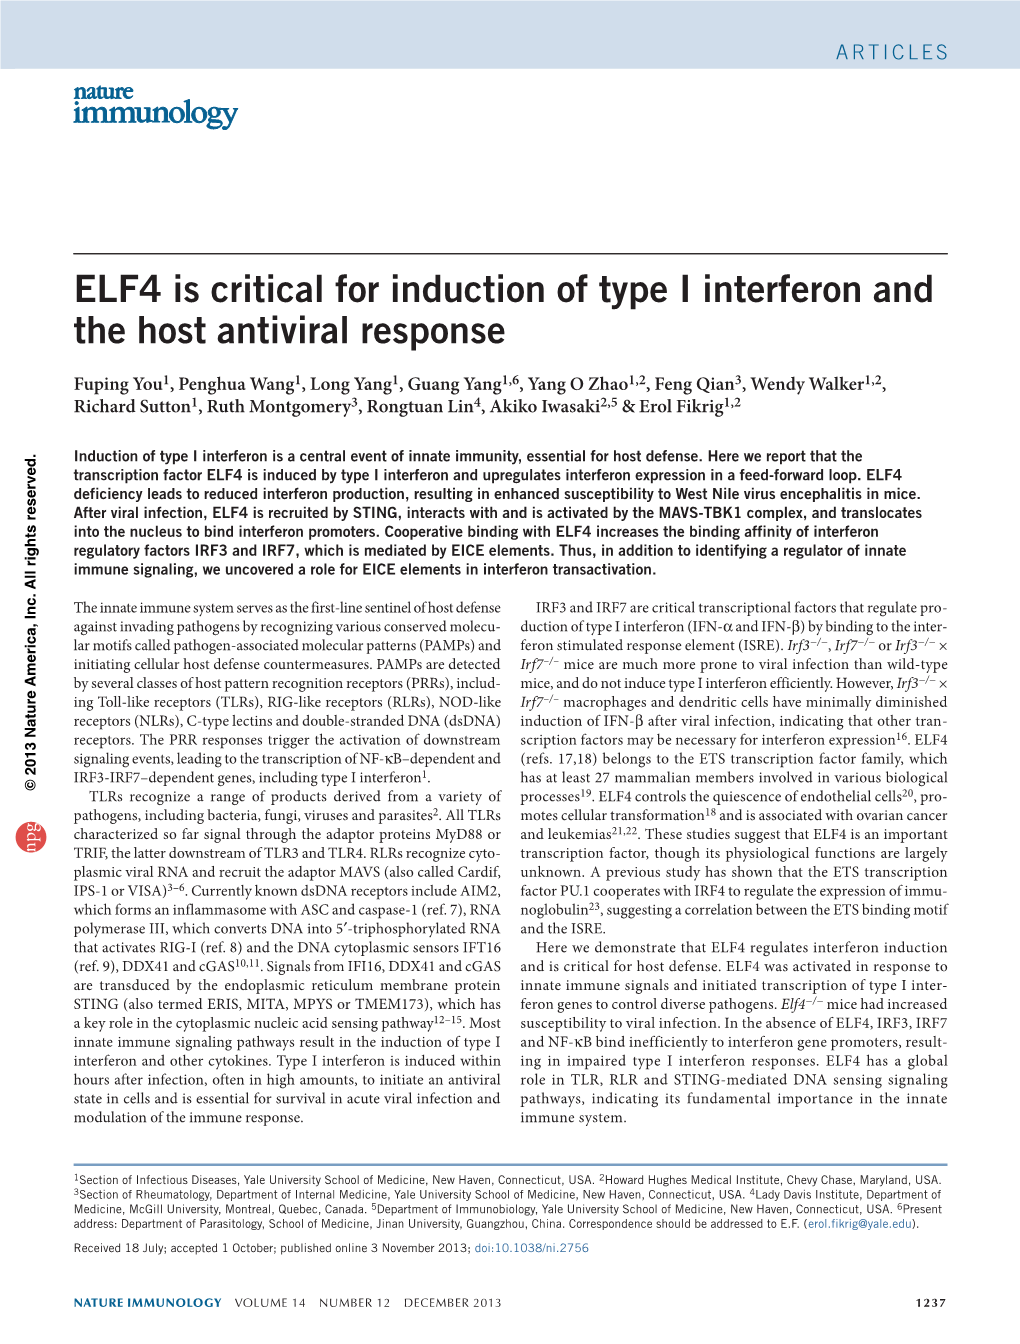 ELF4 Is Critical for Induction of Type I Interferon and the Host Antiviral Response